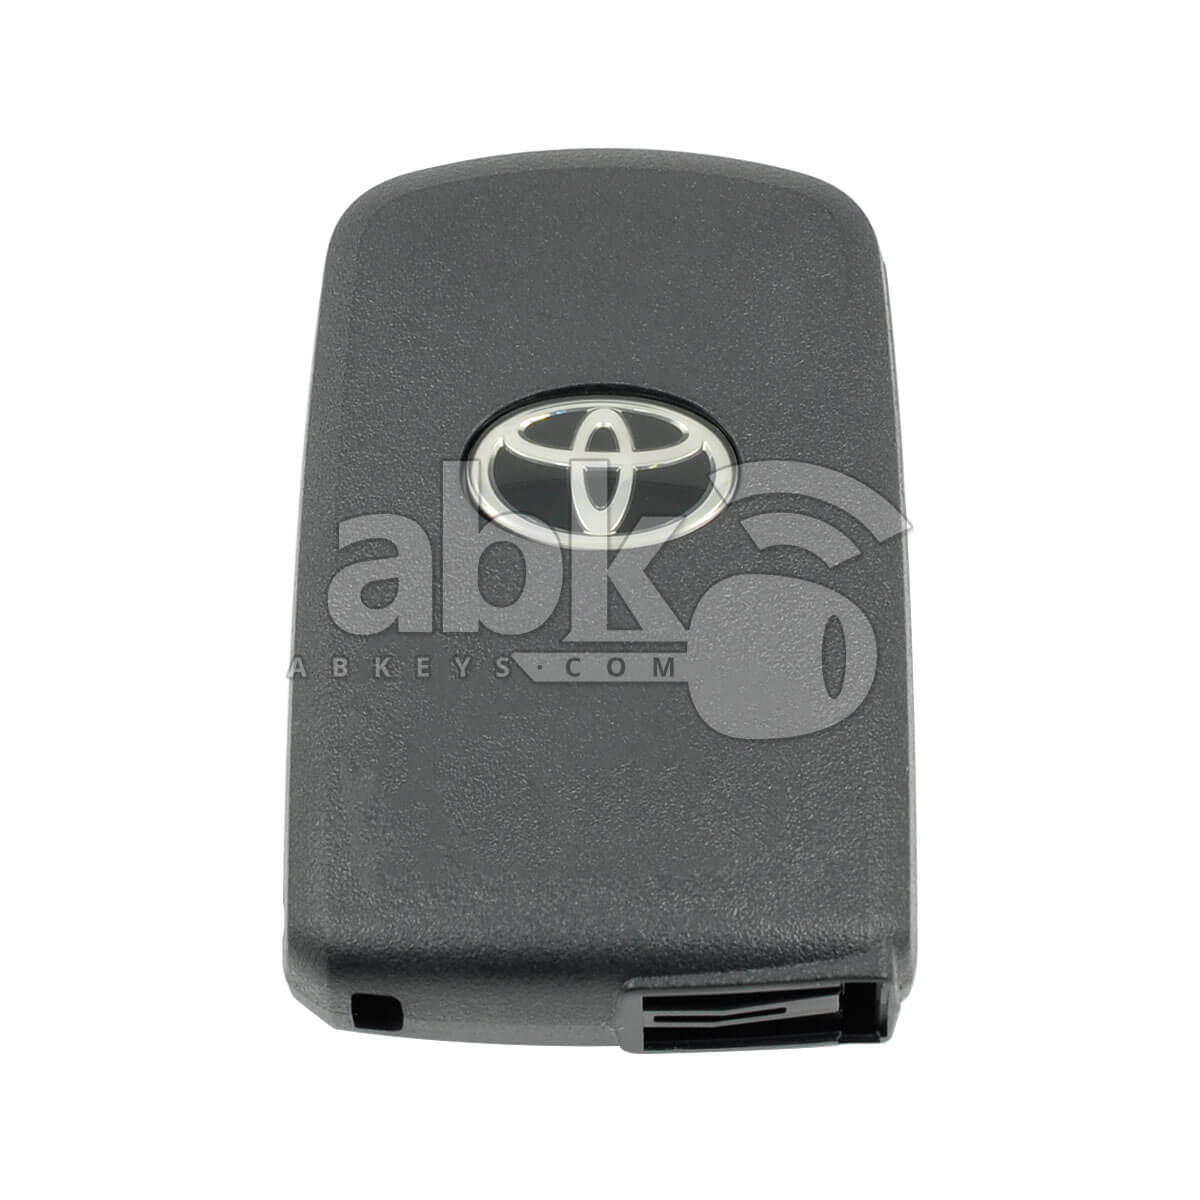 Genuine Toyota Land Cruiser Harrier 2013+ Smart Key 3Buttons 14FAB-01 P1 A8 315MHz 89904-48F21 - 